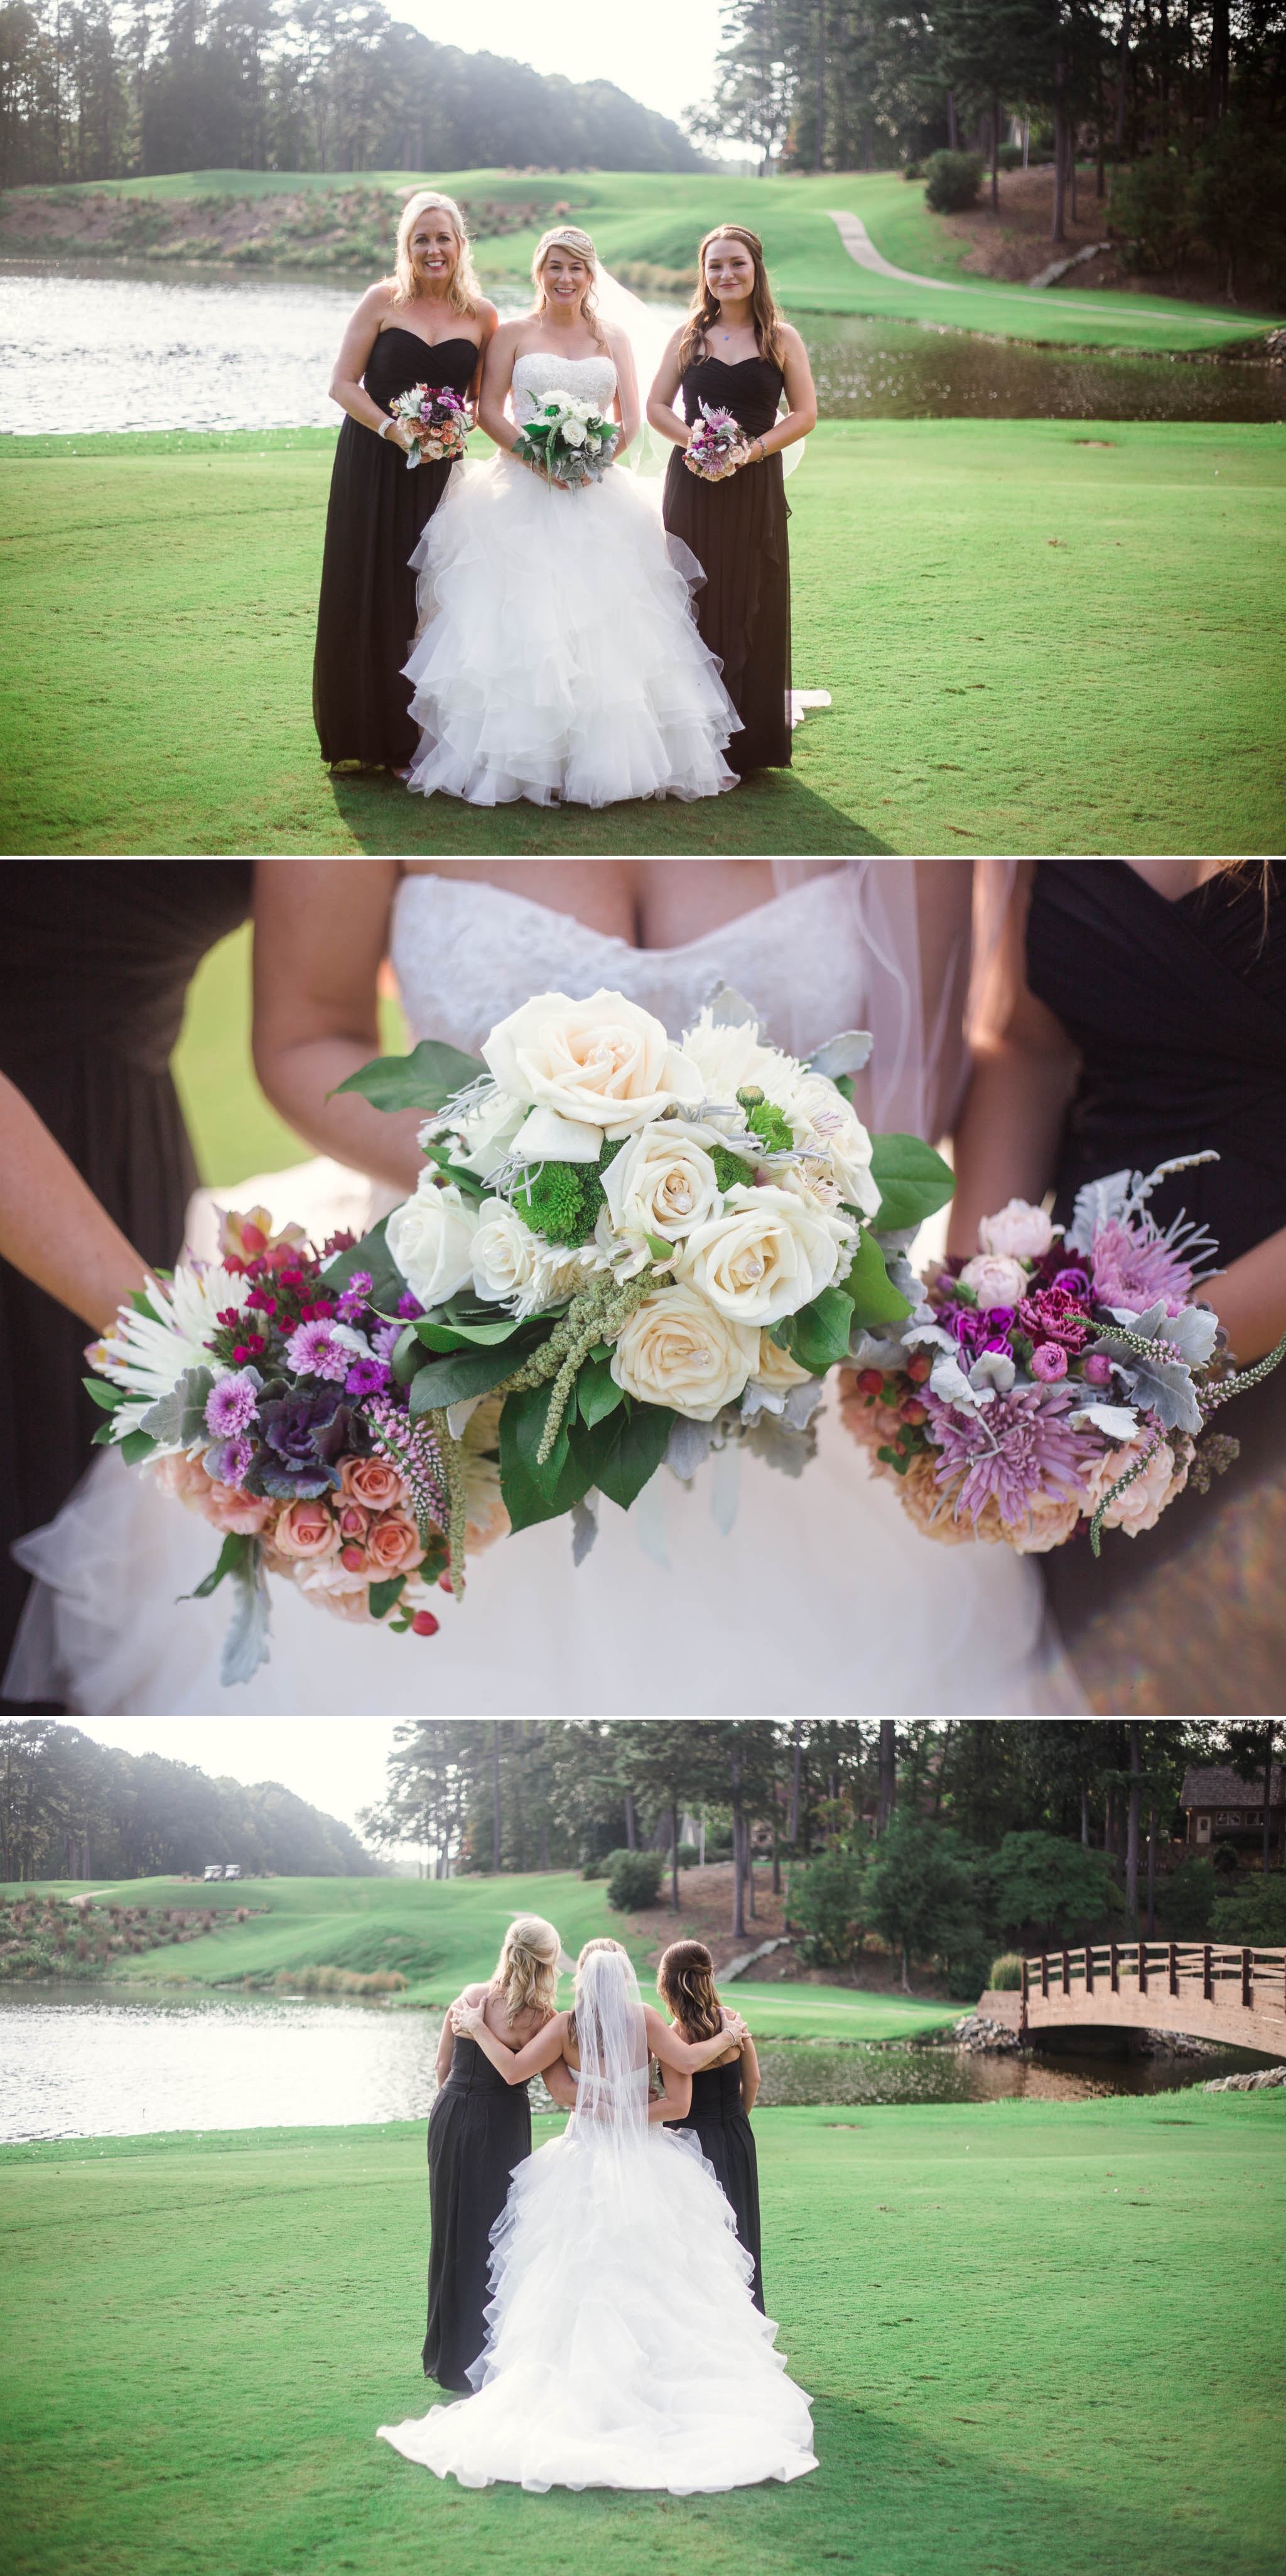 Bridesmaids with the bride - Dona + Doug - MacGregor Downs Country Club in Cary, NC - Raleigh Wedding Photographer